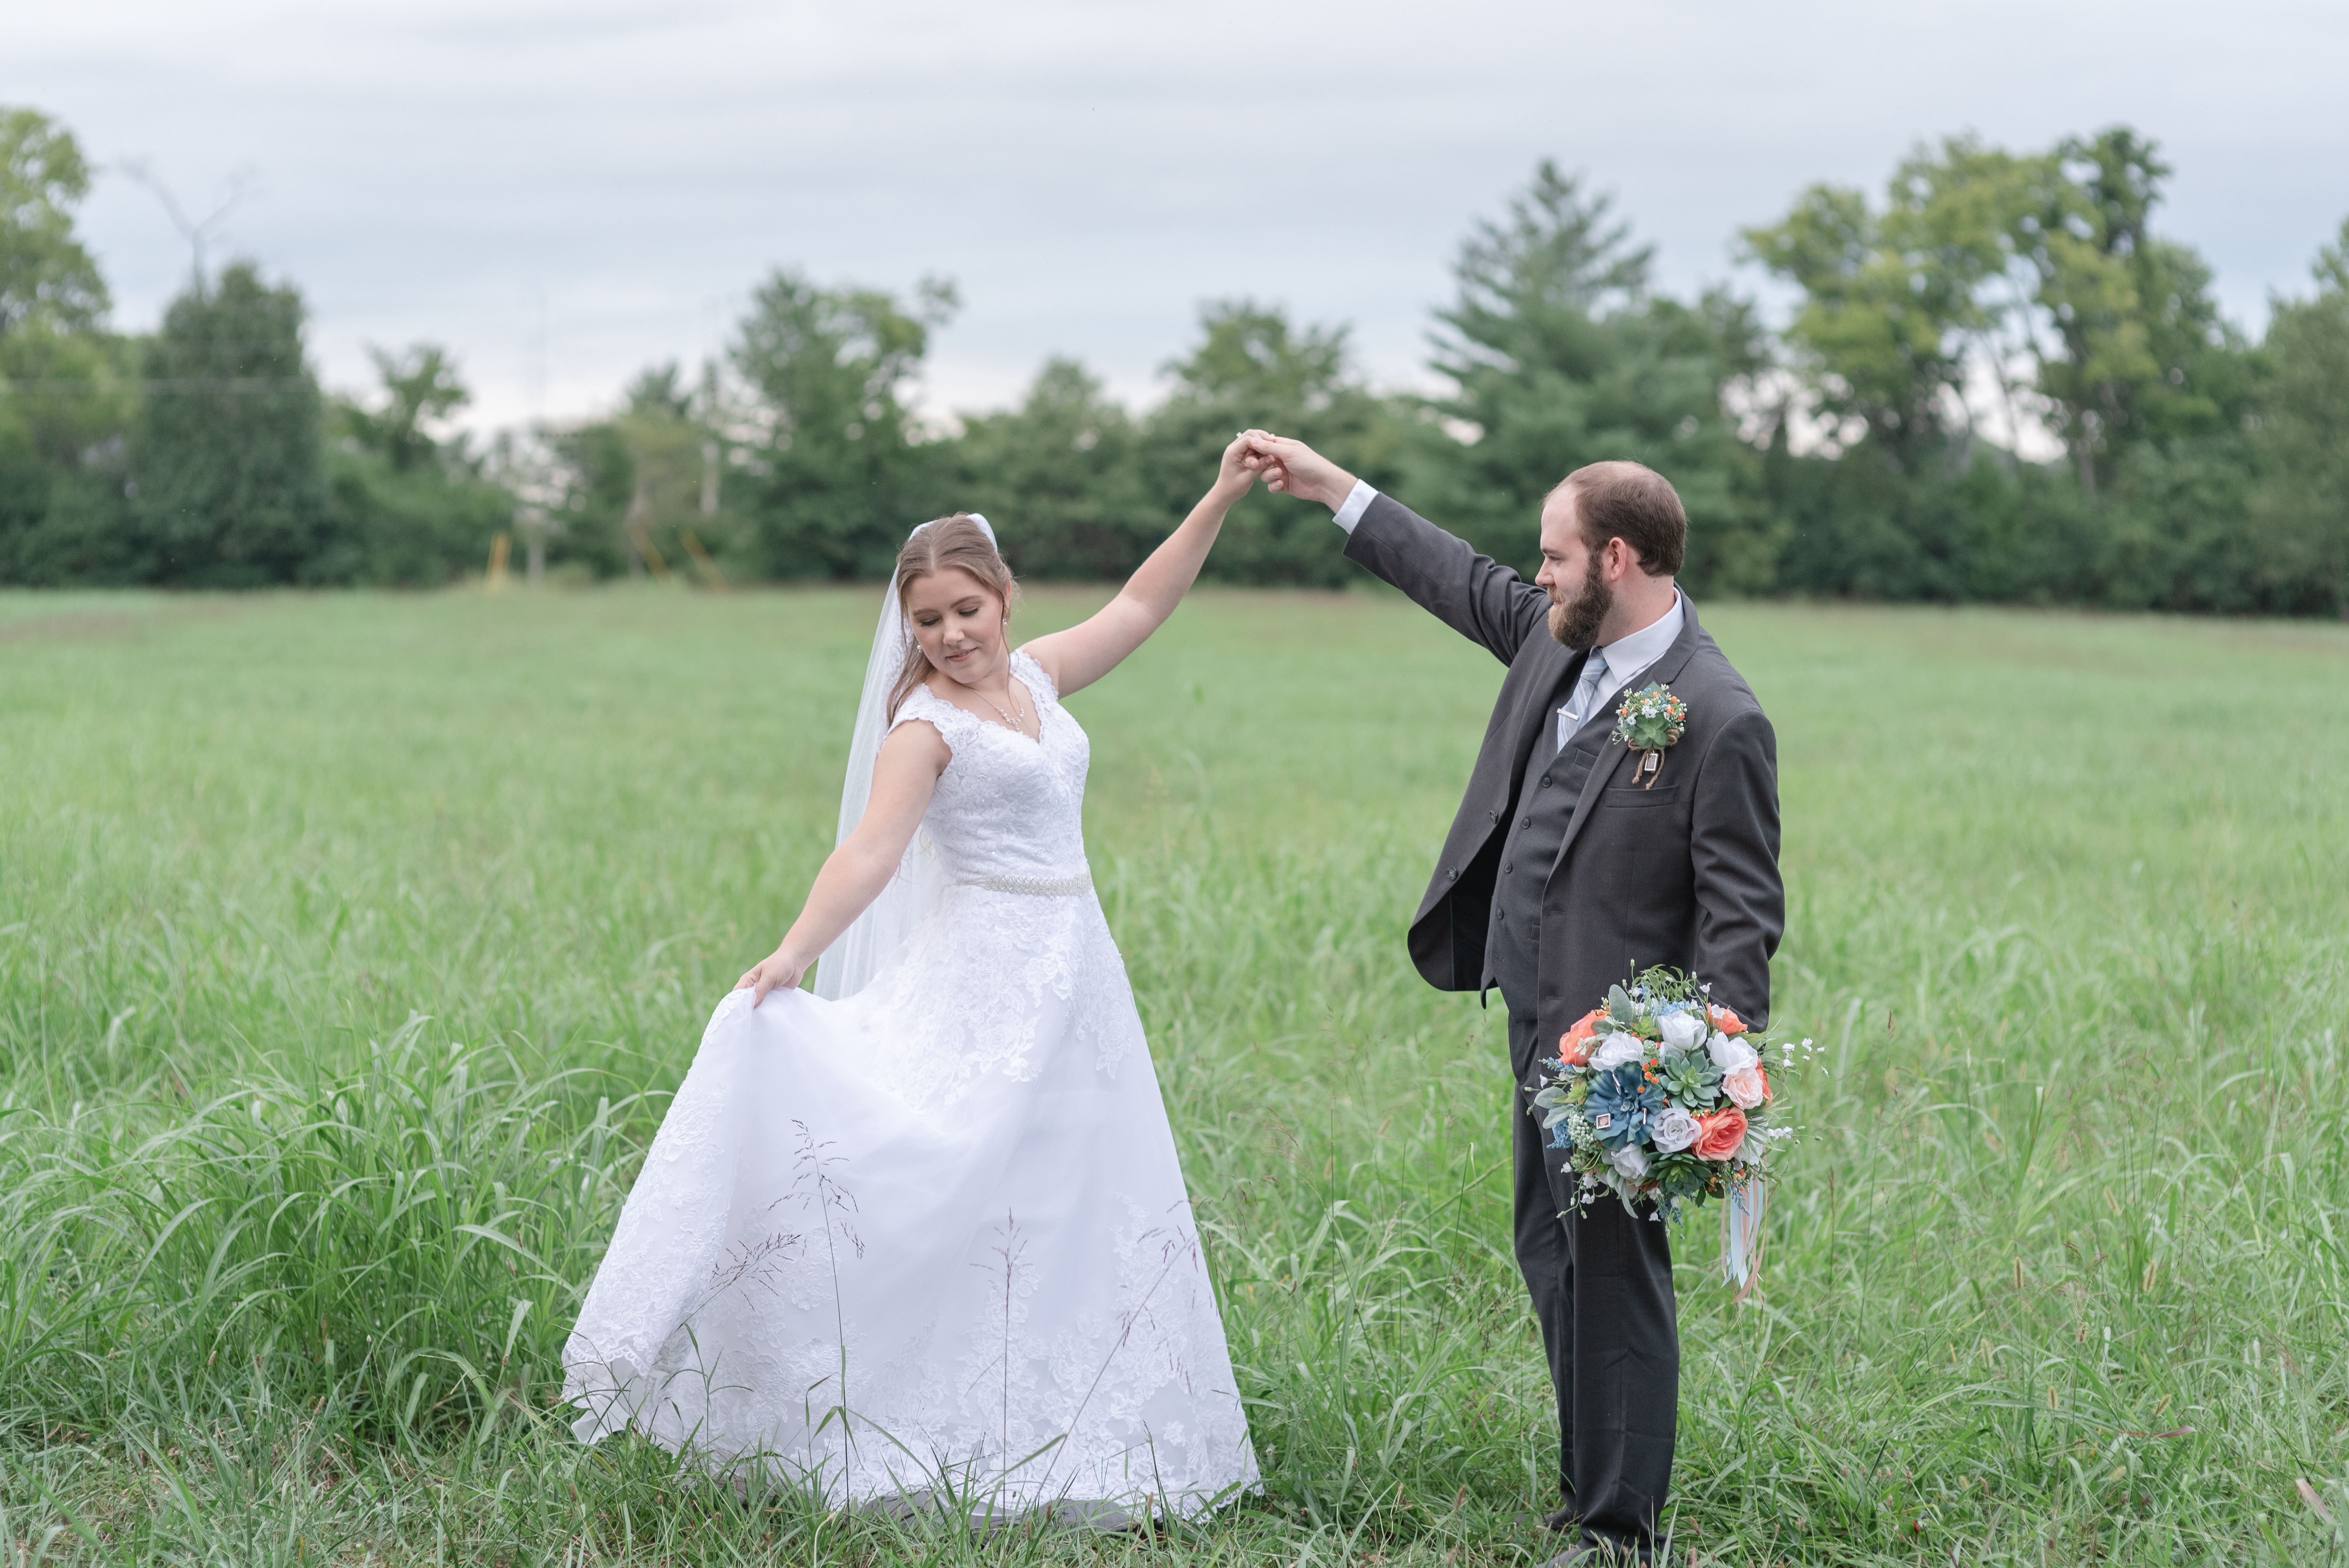 A new husband and wife are dancing together in a field in Nashville, TN